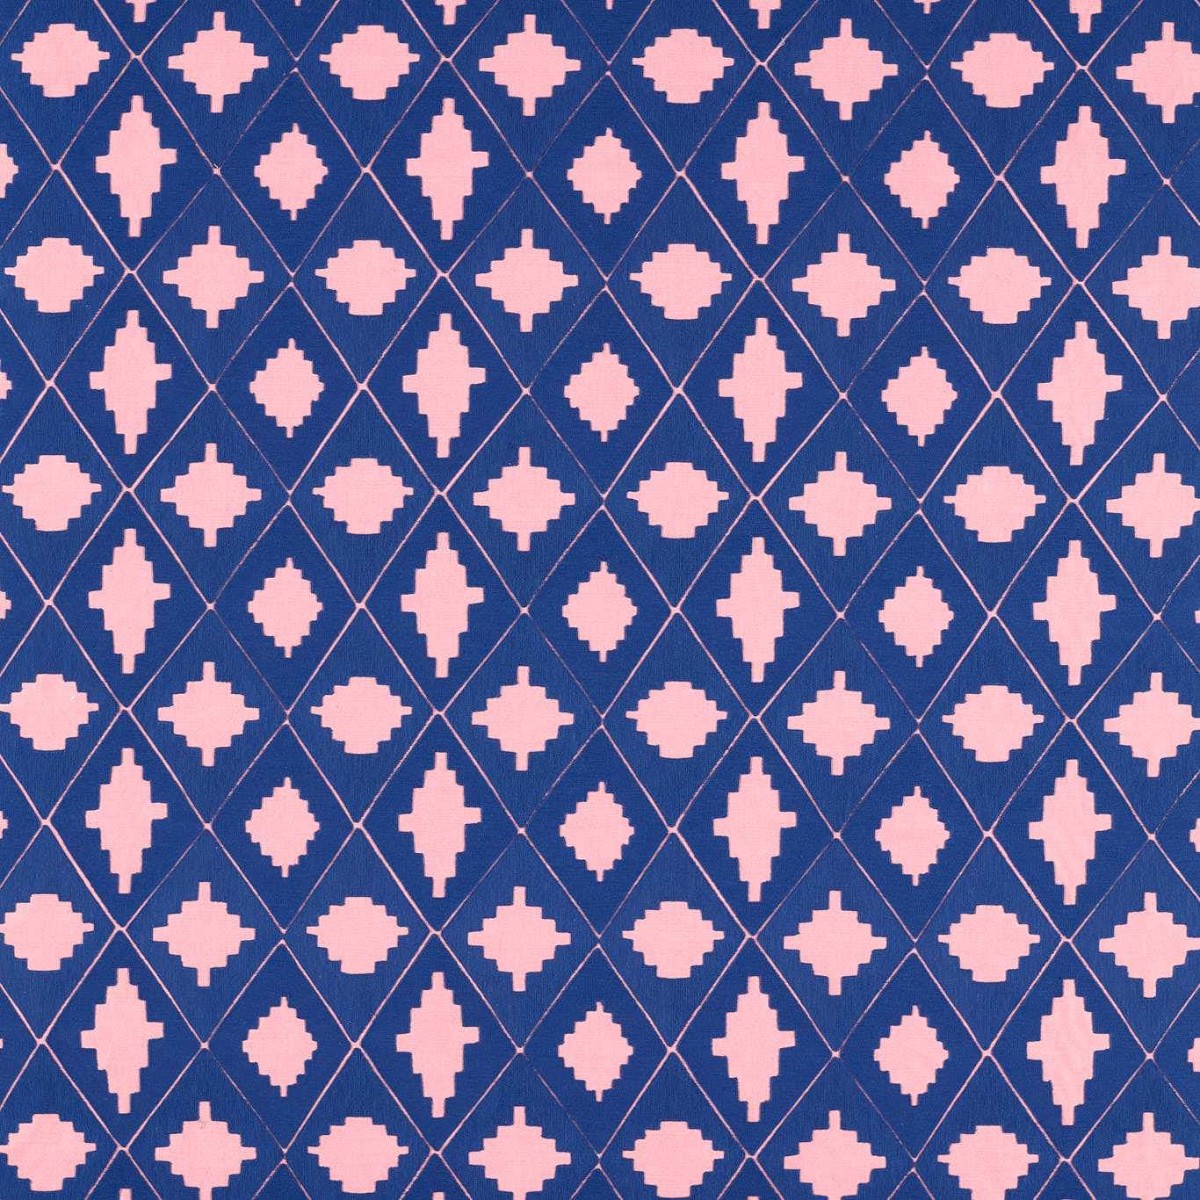 Garden Terrace Lapis/Rose Fabric by Harlequin